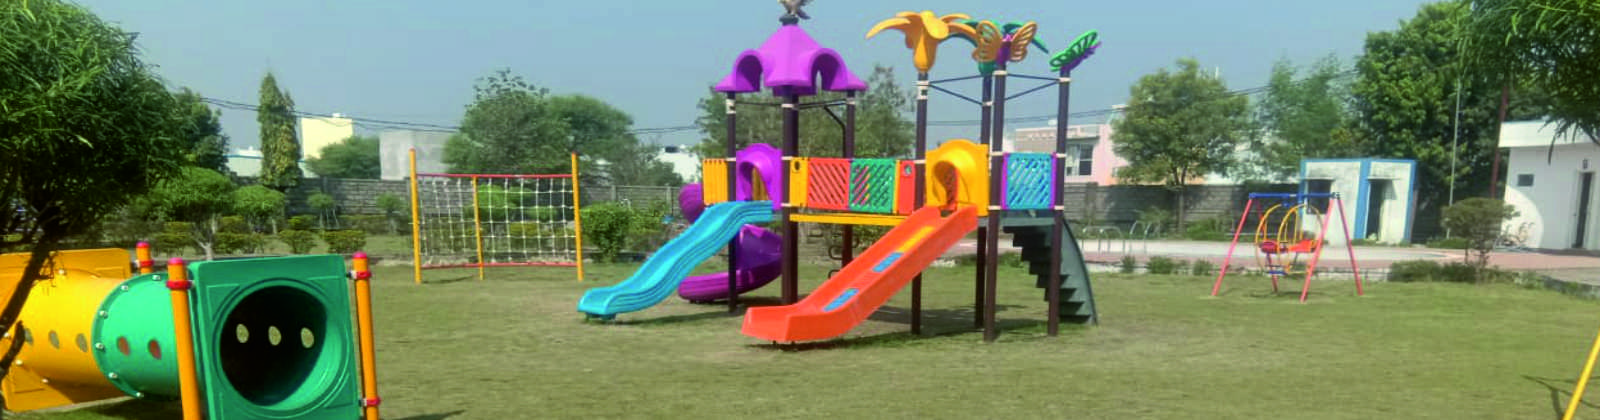 Play Pen Area: Nurturing Young Minds through Play